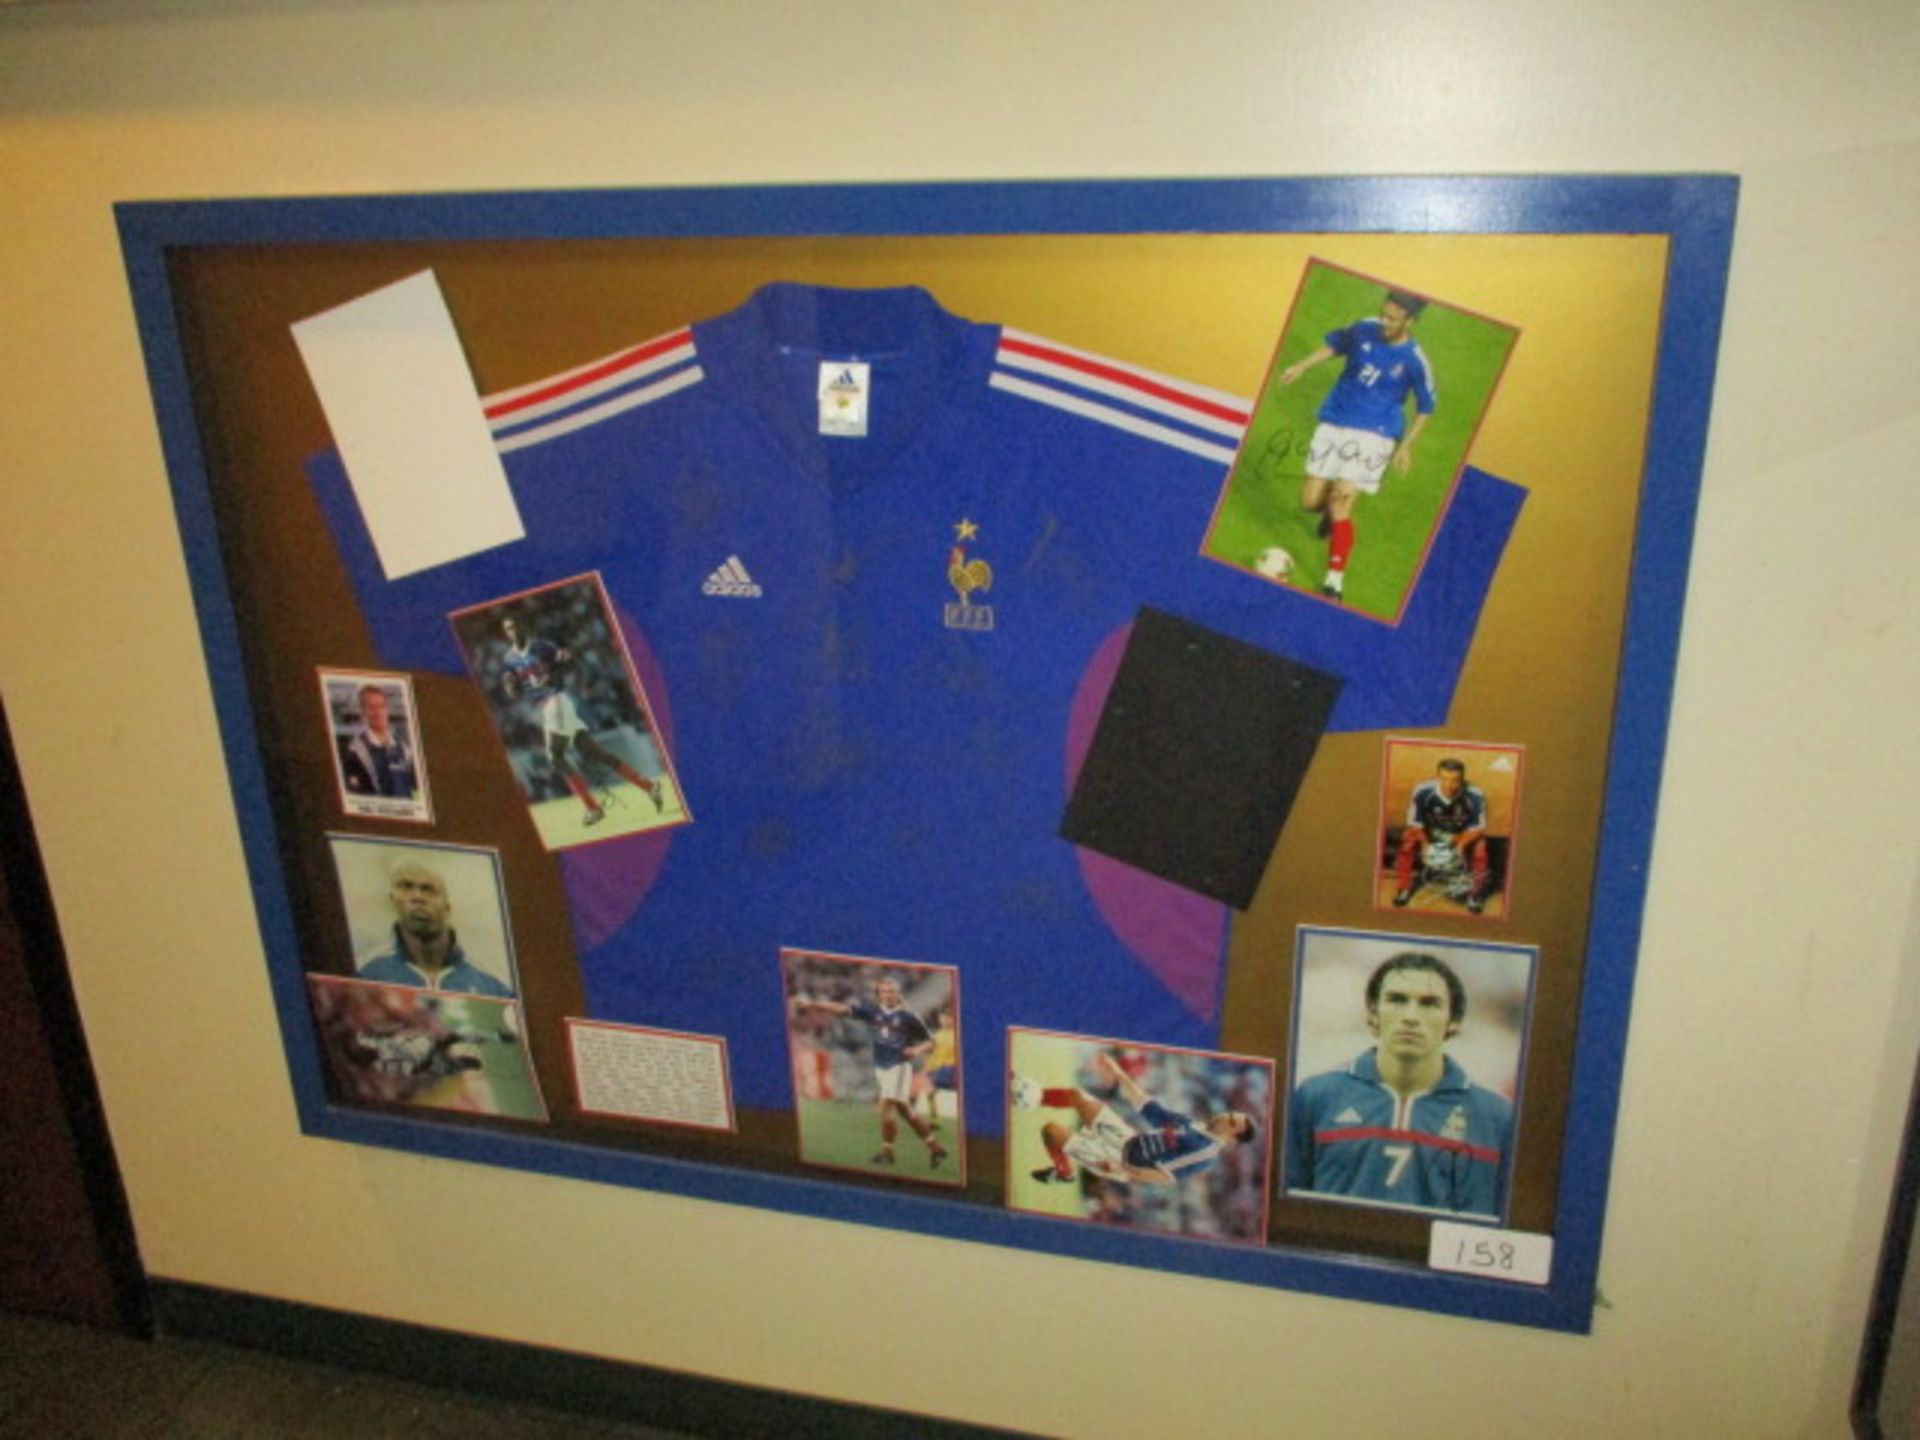 French National Team 1998 World Cup champion signed jersey with 9 individual signed photos, 53in w x - Image 2 of 3